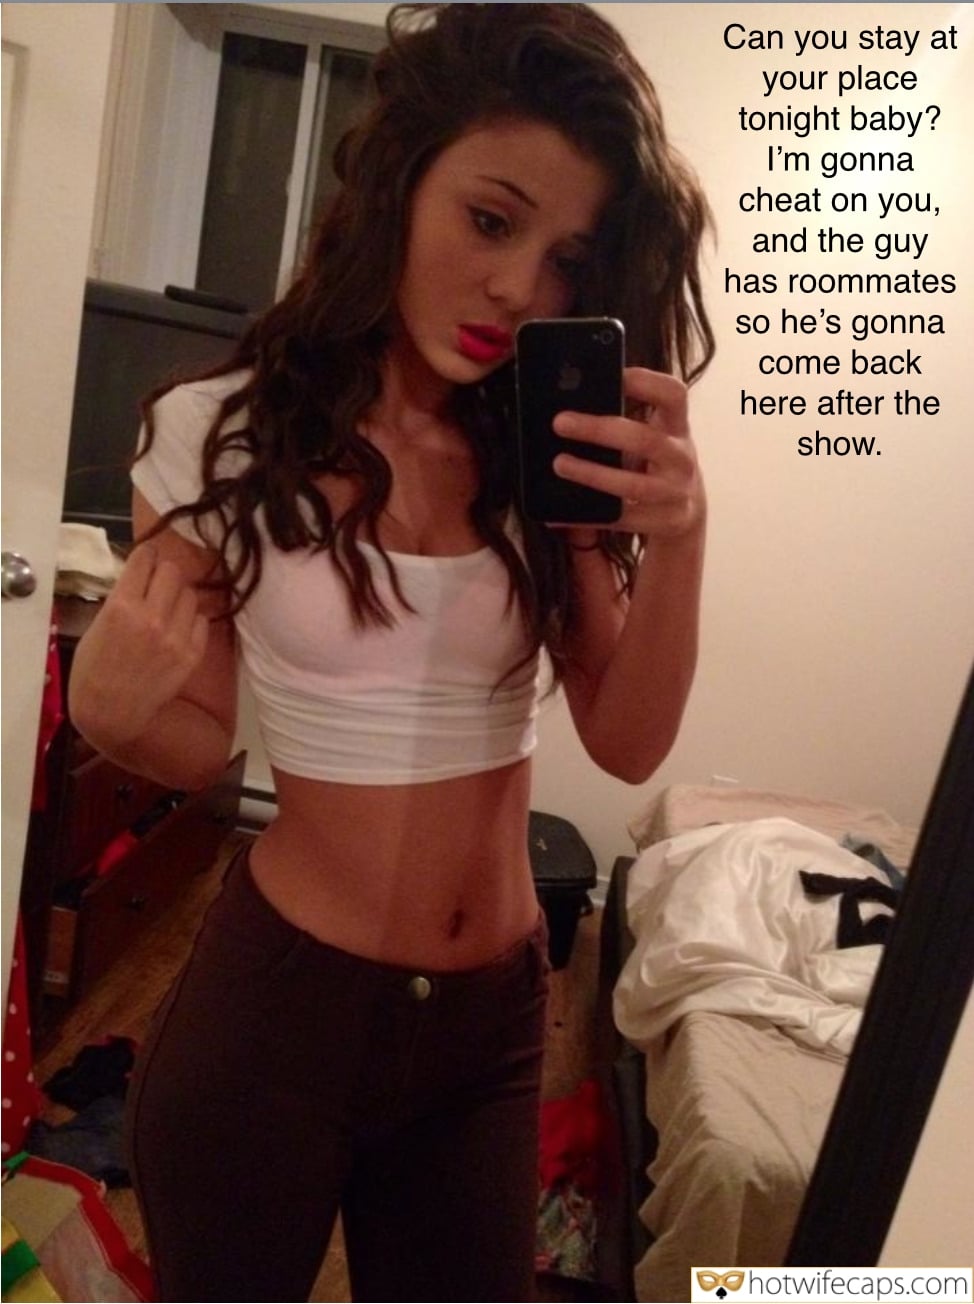 Threesome Sexy Memes Group Sex Friends Cheating hotwife caption: Can you stay at your place tonight baby? I’m gonna cheat on you, and the guy has roommates so he’s gonna come back here after the show. Slender Beauty With Small Tits